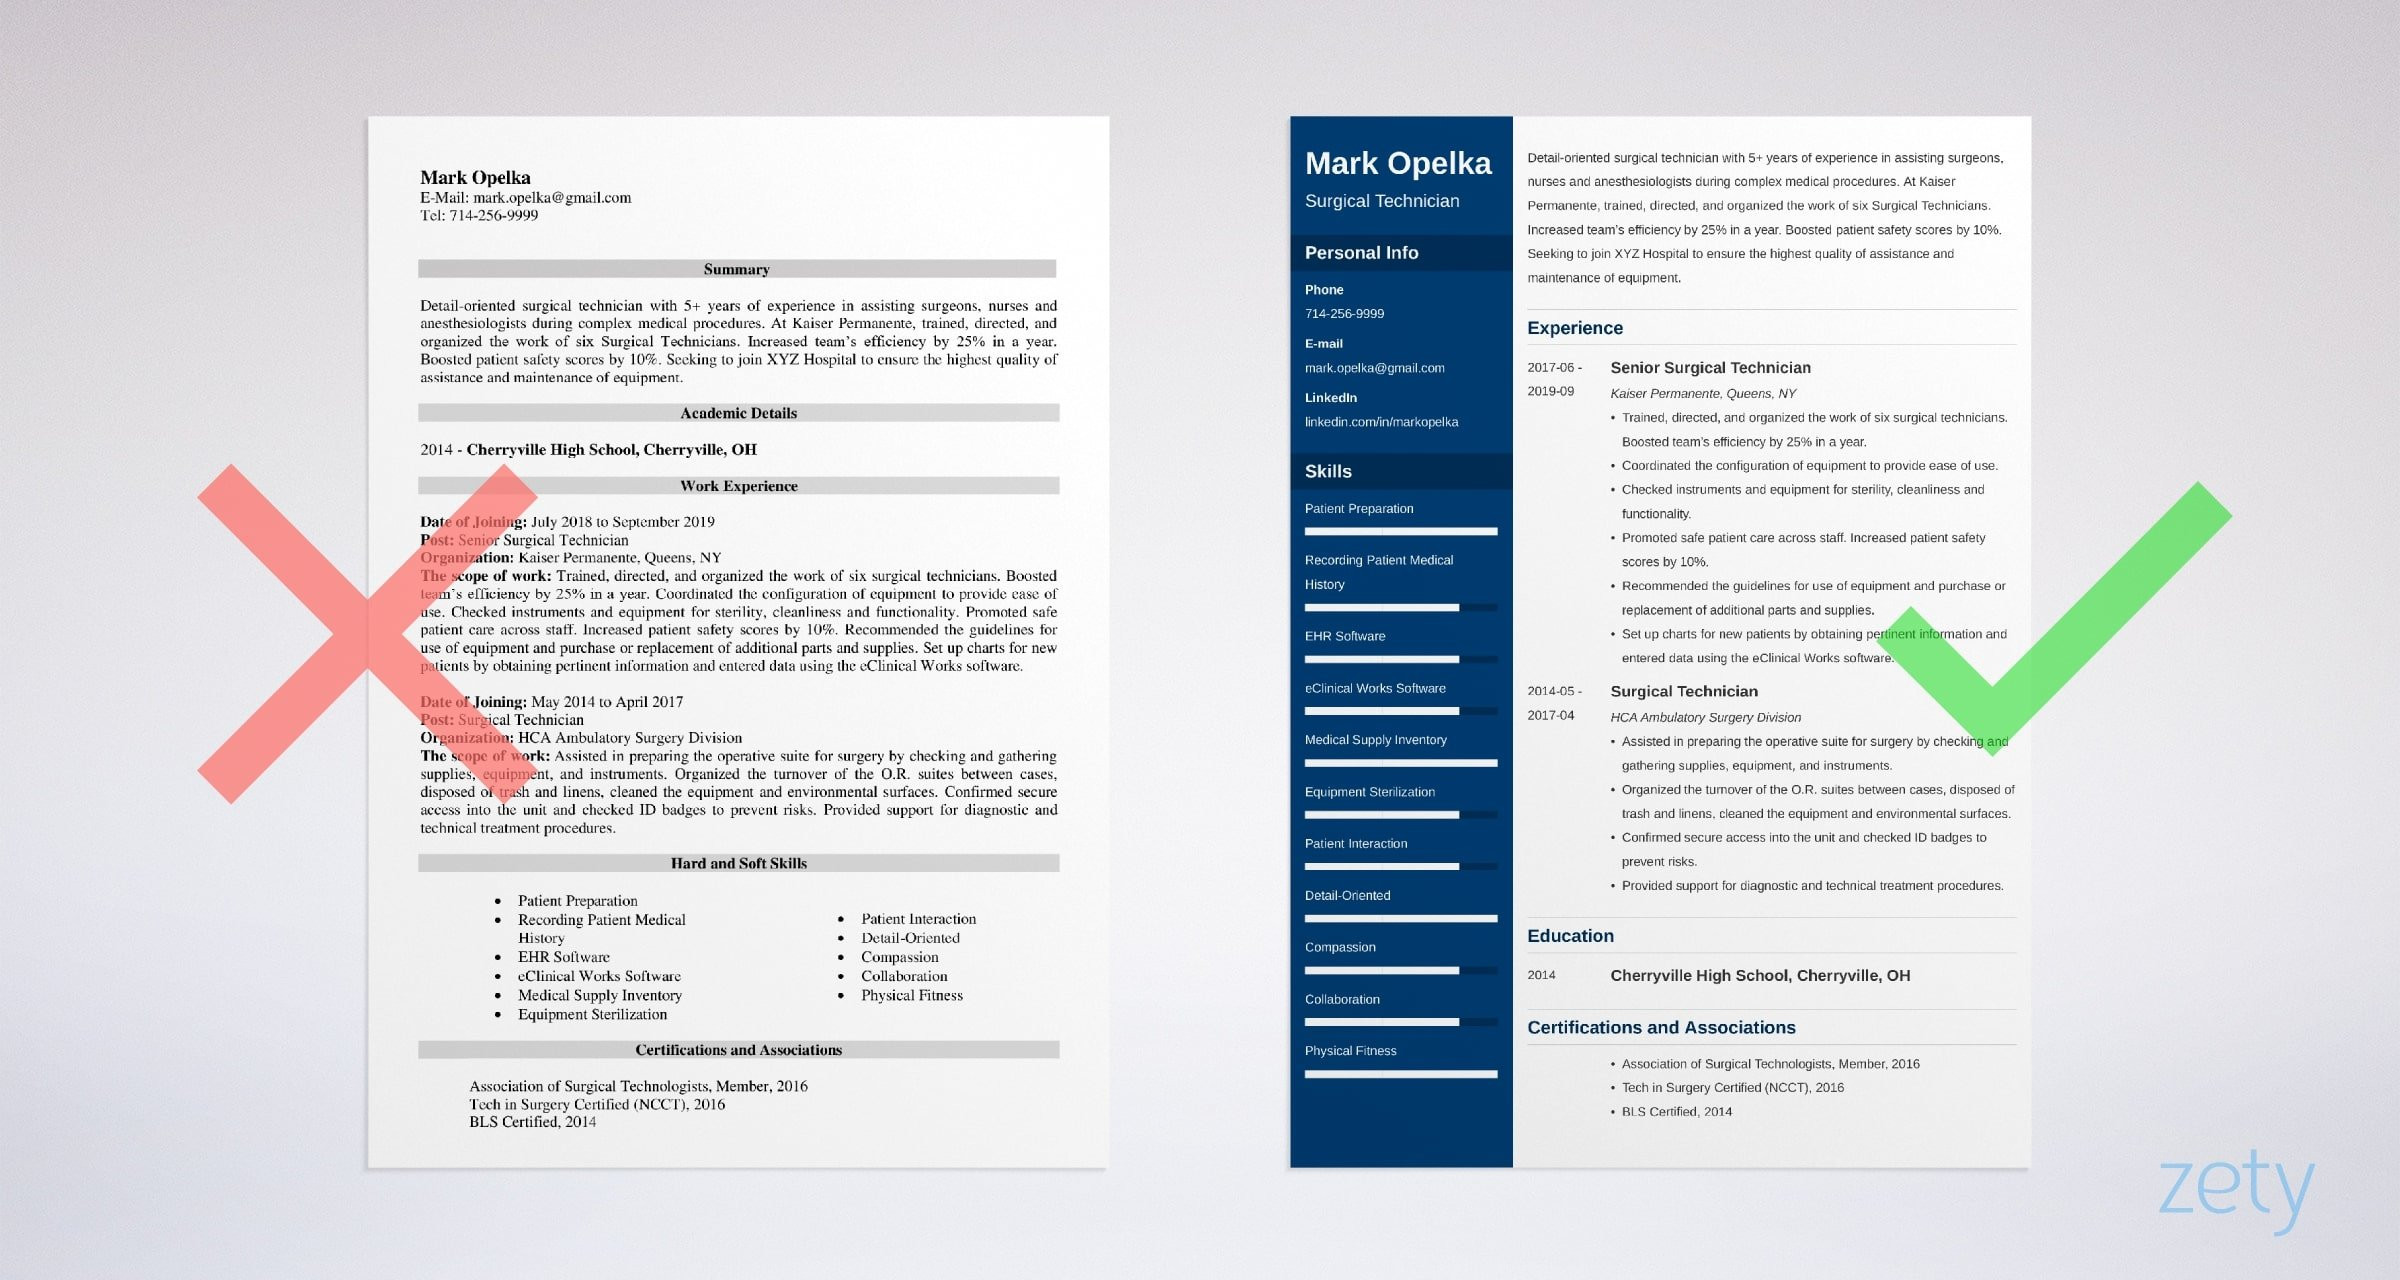 Free Sample Of Activities Tech Worker Resume Surgical Tech Resume [samples for Technologist & Technician]